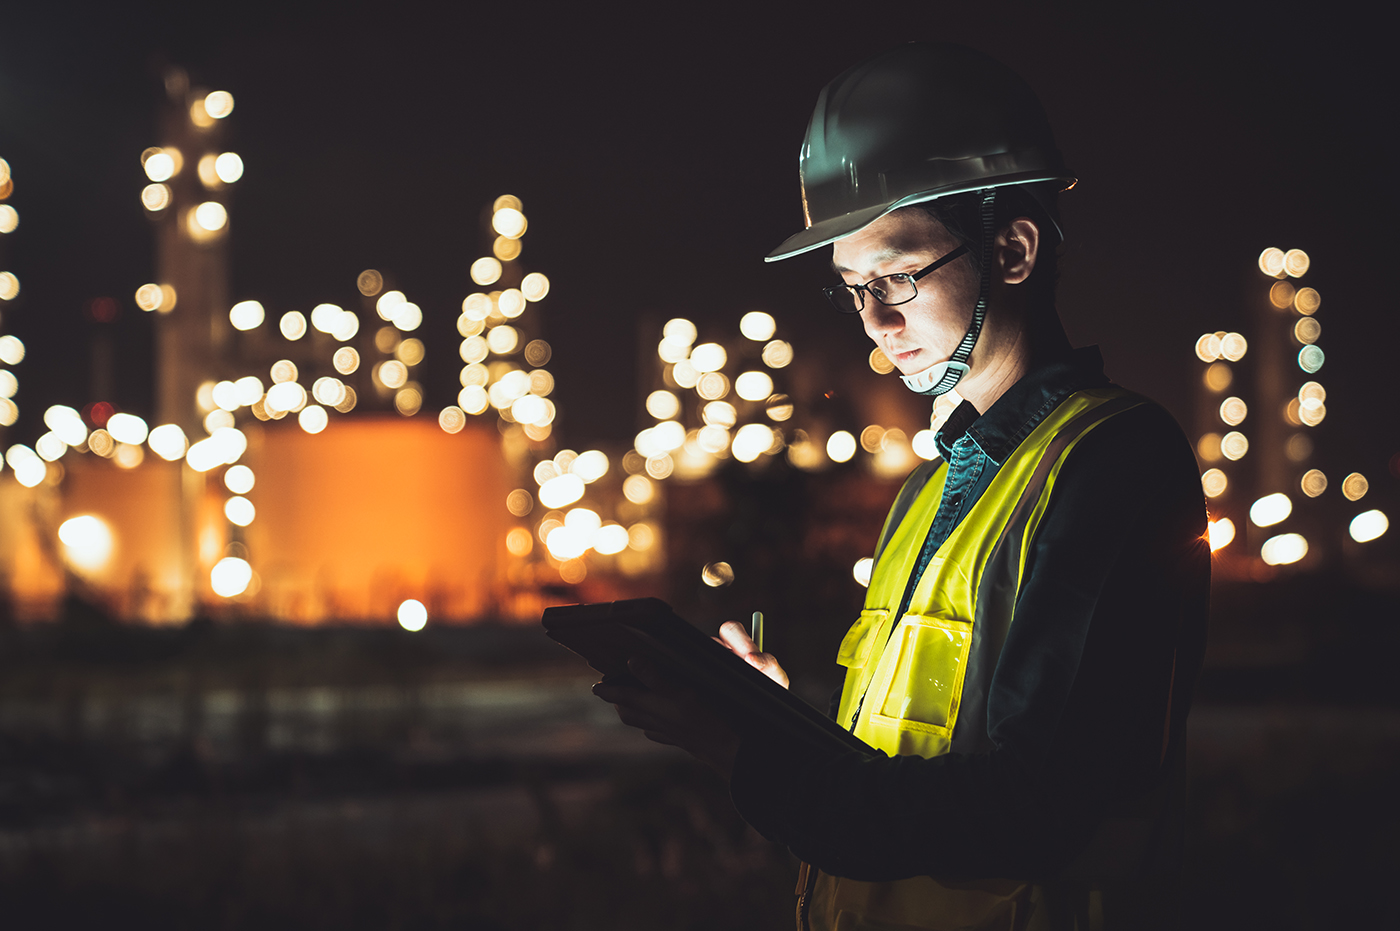 Man in vest and helmet working on an iPad in front of a lot of lights at an energy plant.